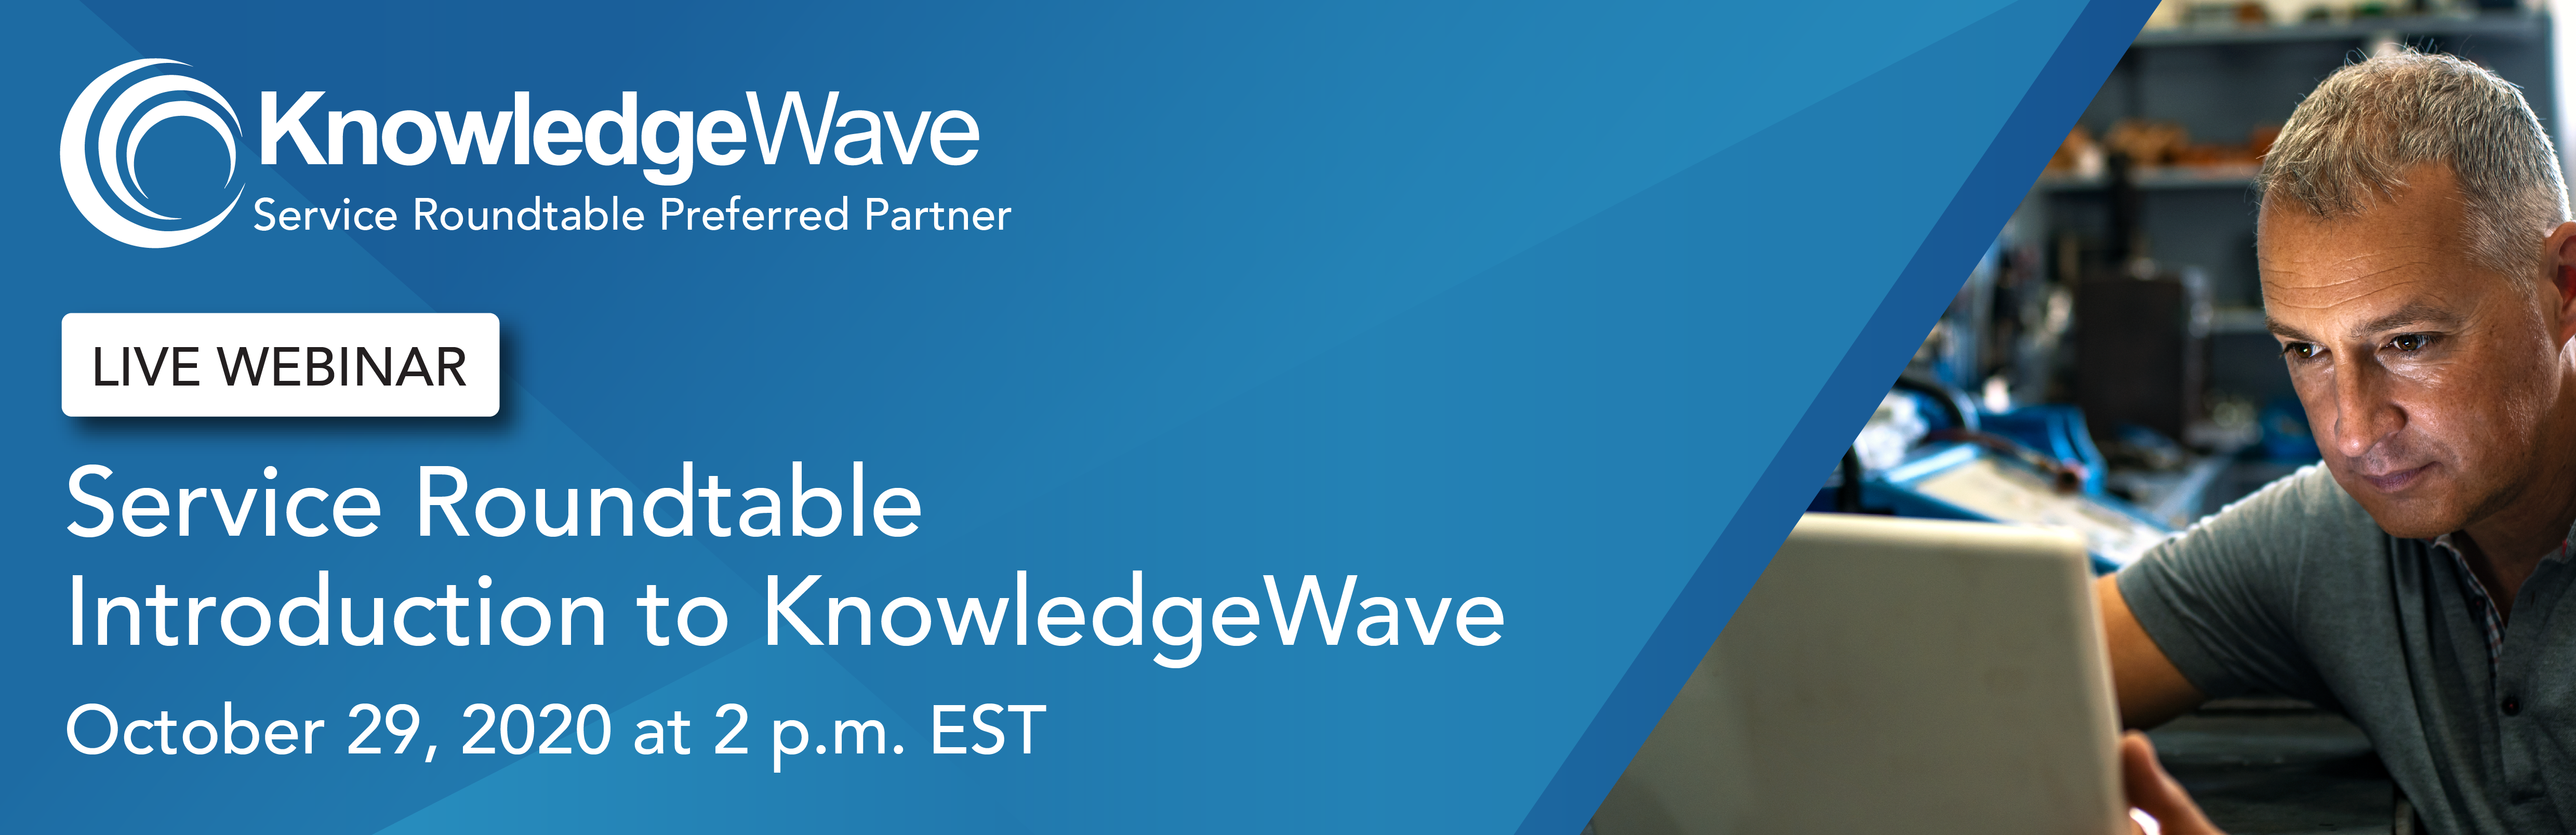 Live Webinar: Service Roundtable Introduction to KnowledgeWave